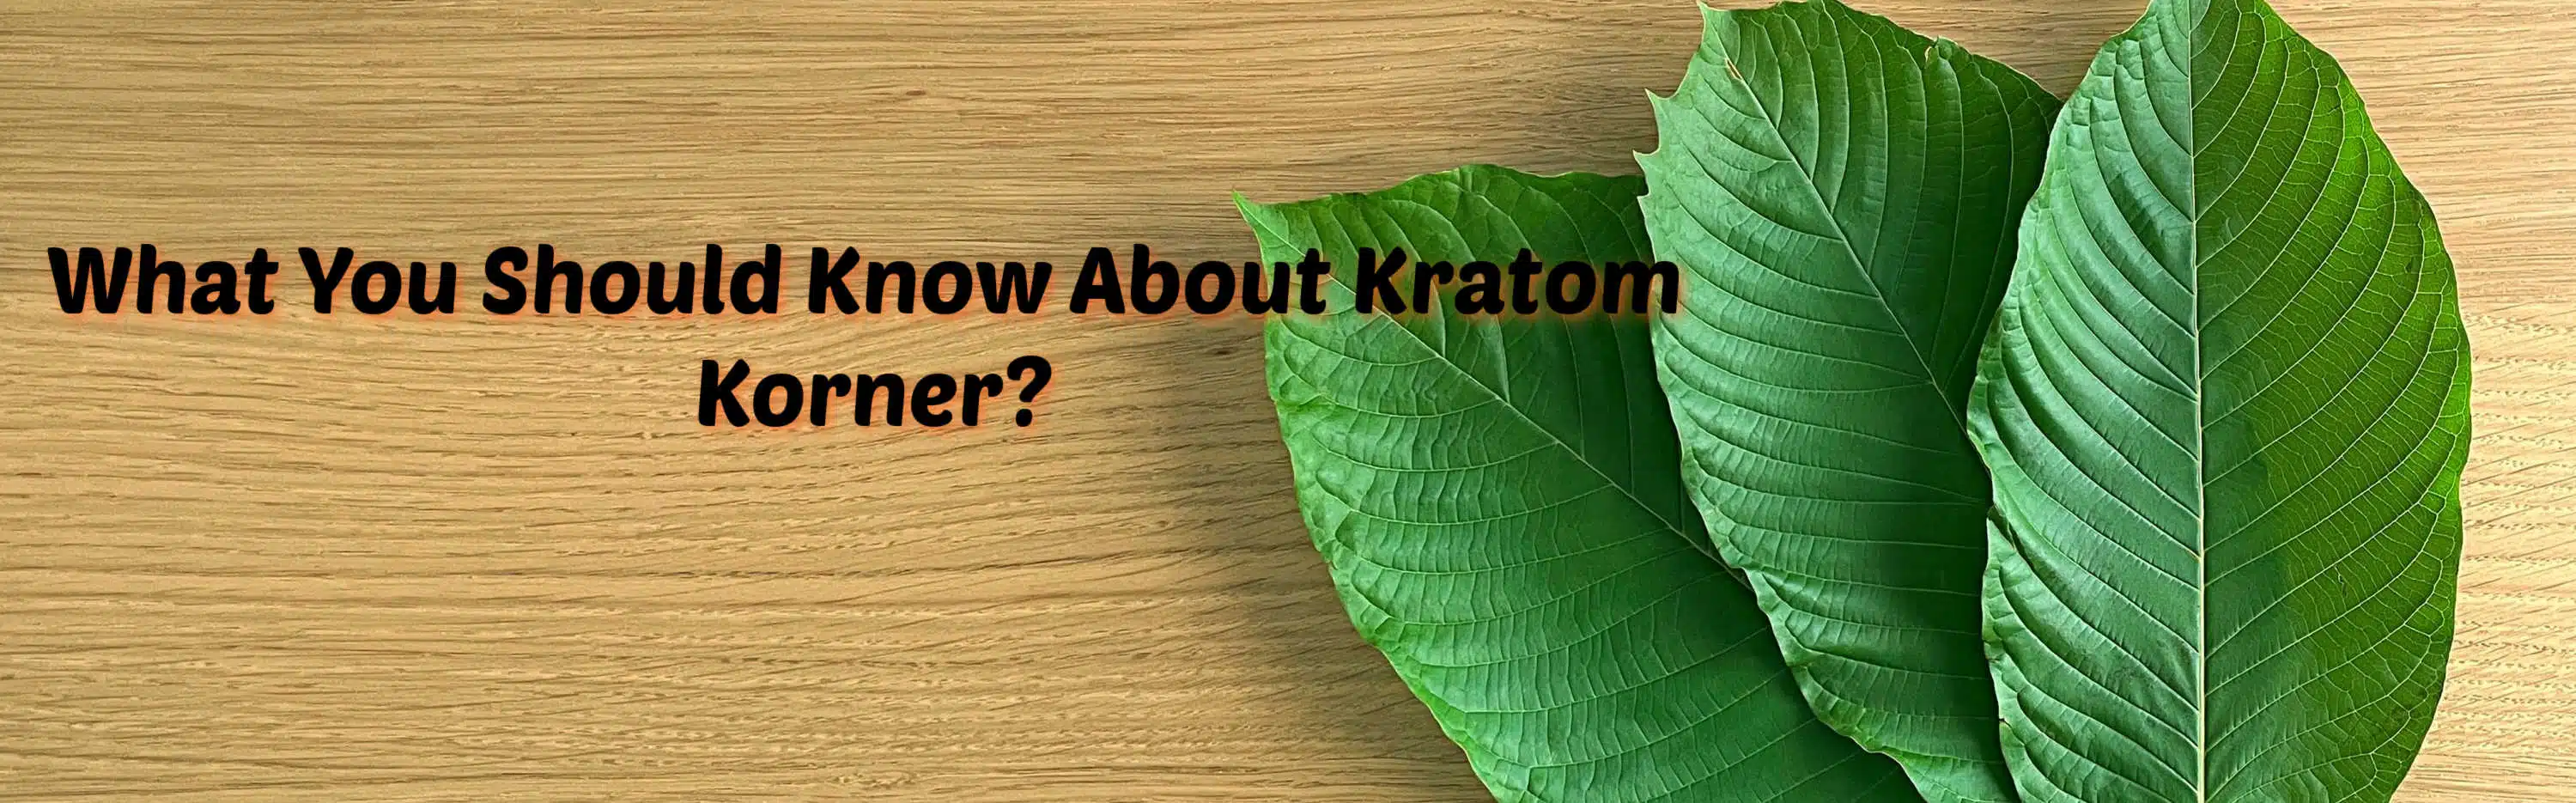 image of what should you know about kratom korner